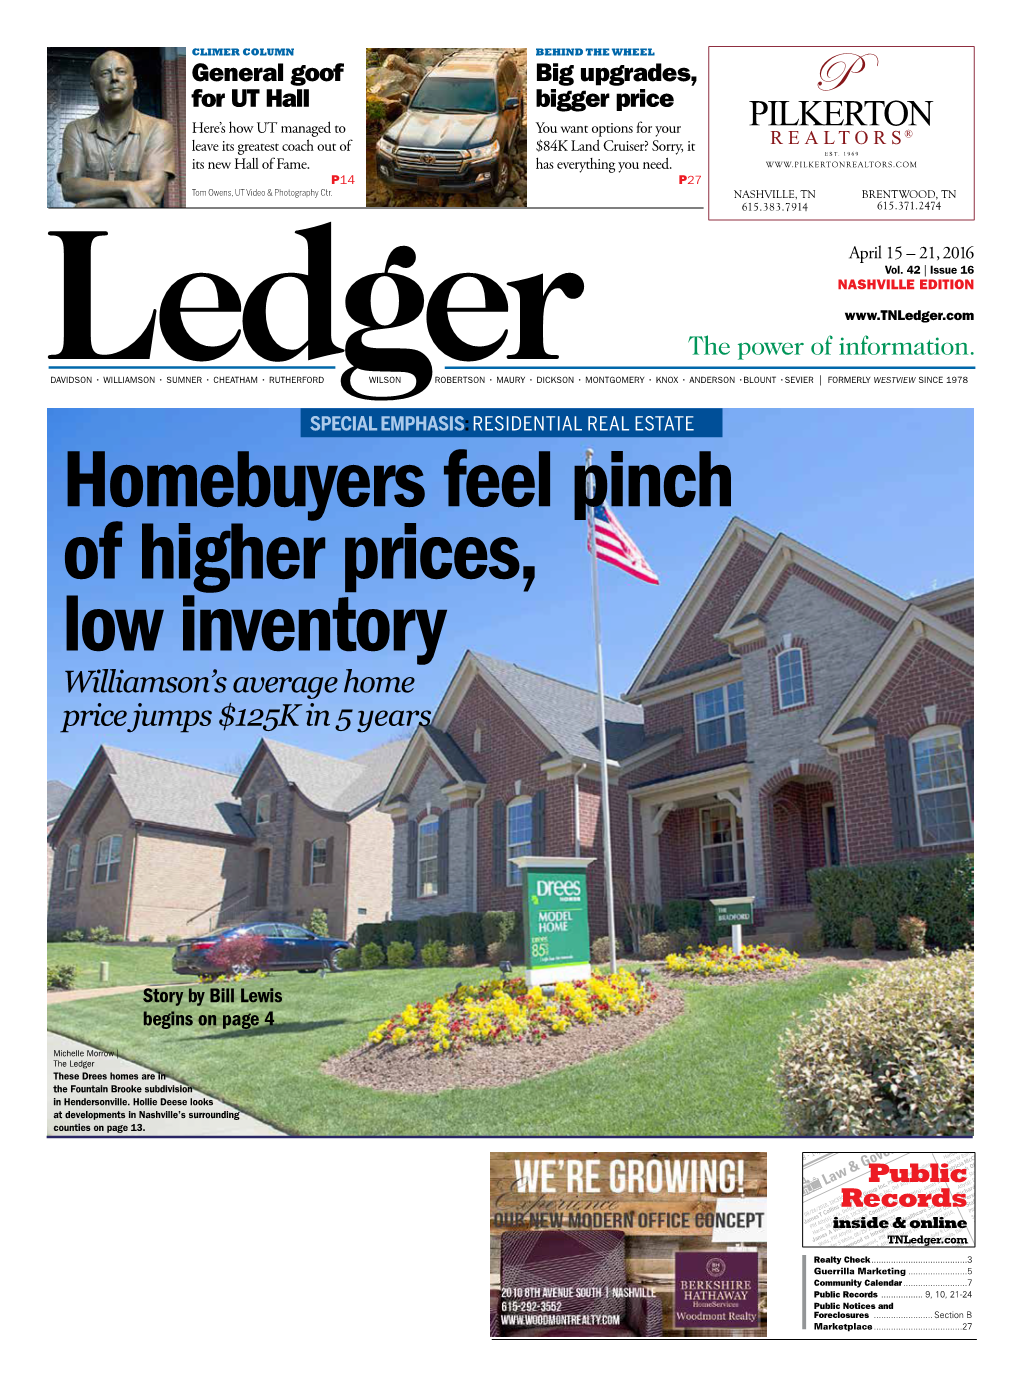 Homebuyers Feel Pinch of Higher Prices, Low Inventory Williamson’S Average Home Price Jumps $125K in 5 Years